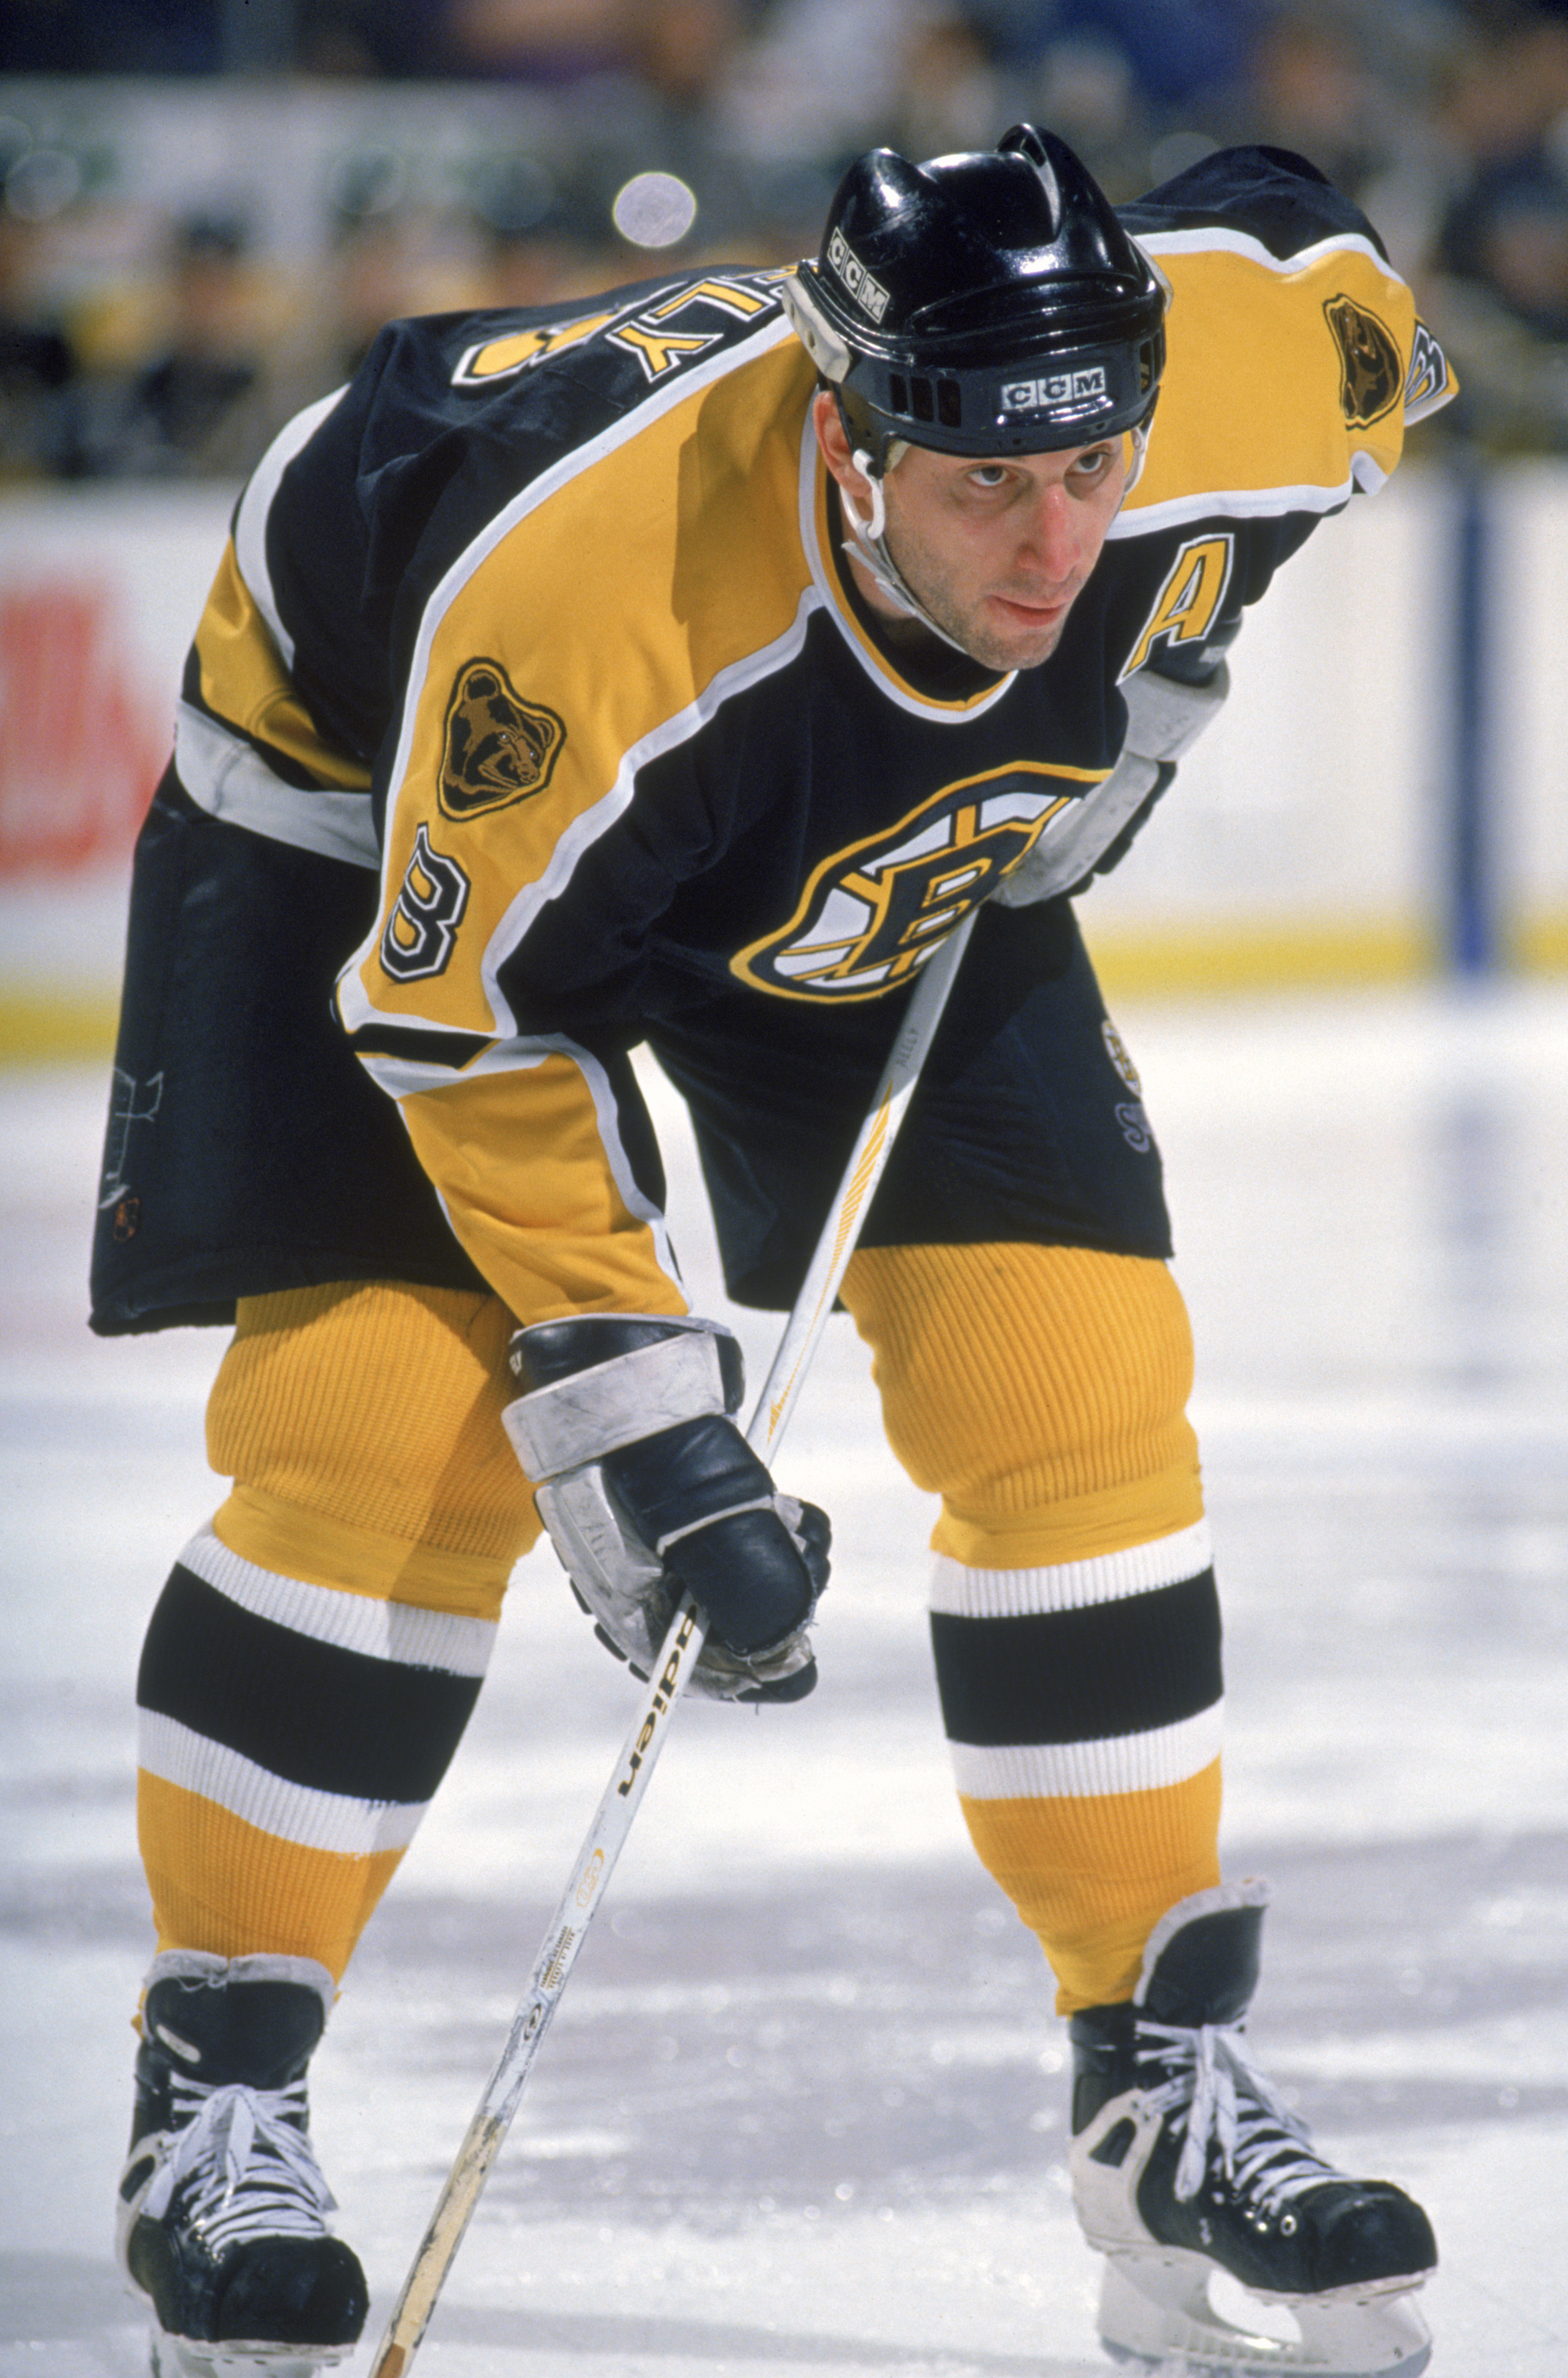 NHL: Three Former Players That Deserve to Have Their Number Retired